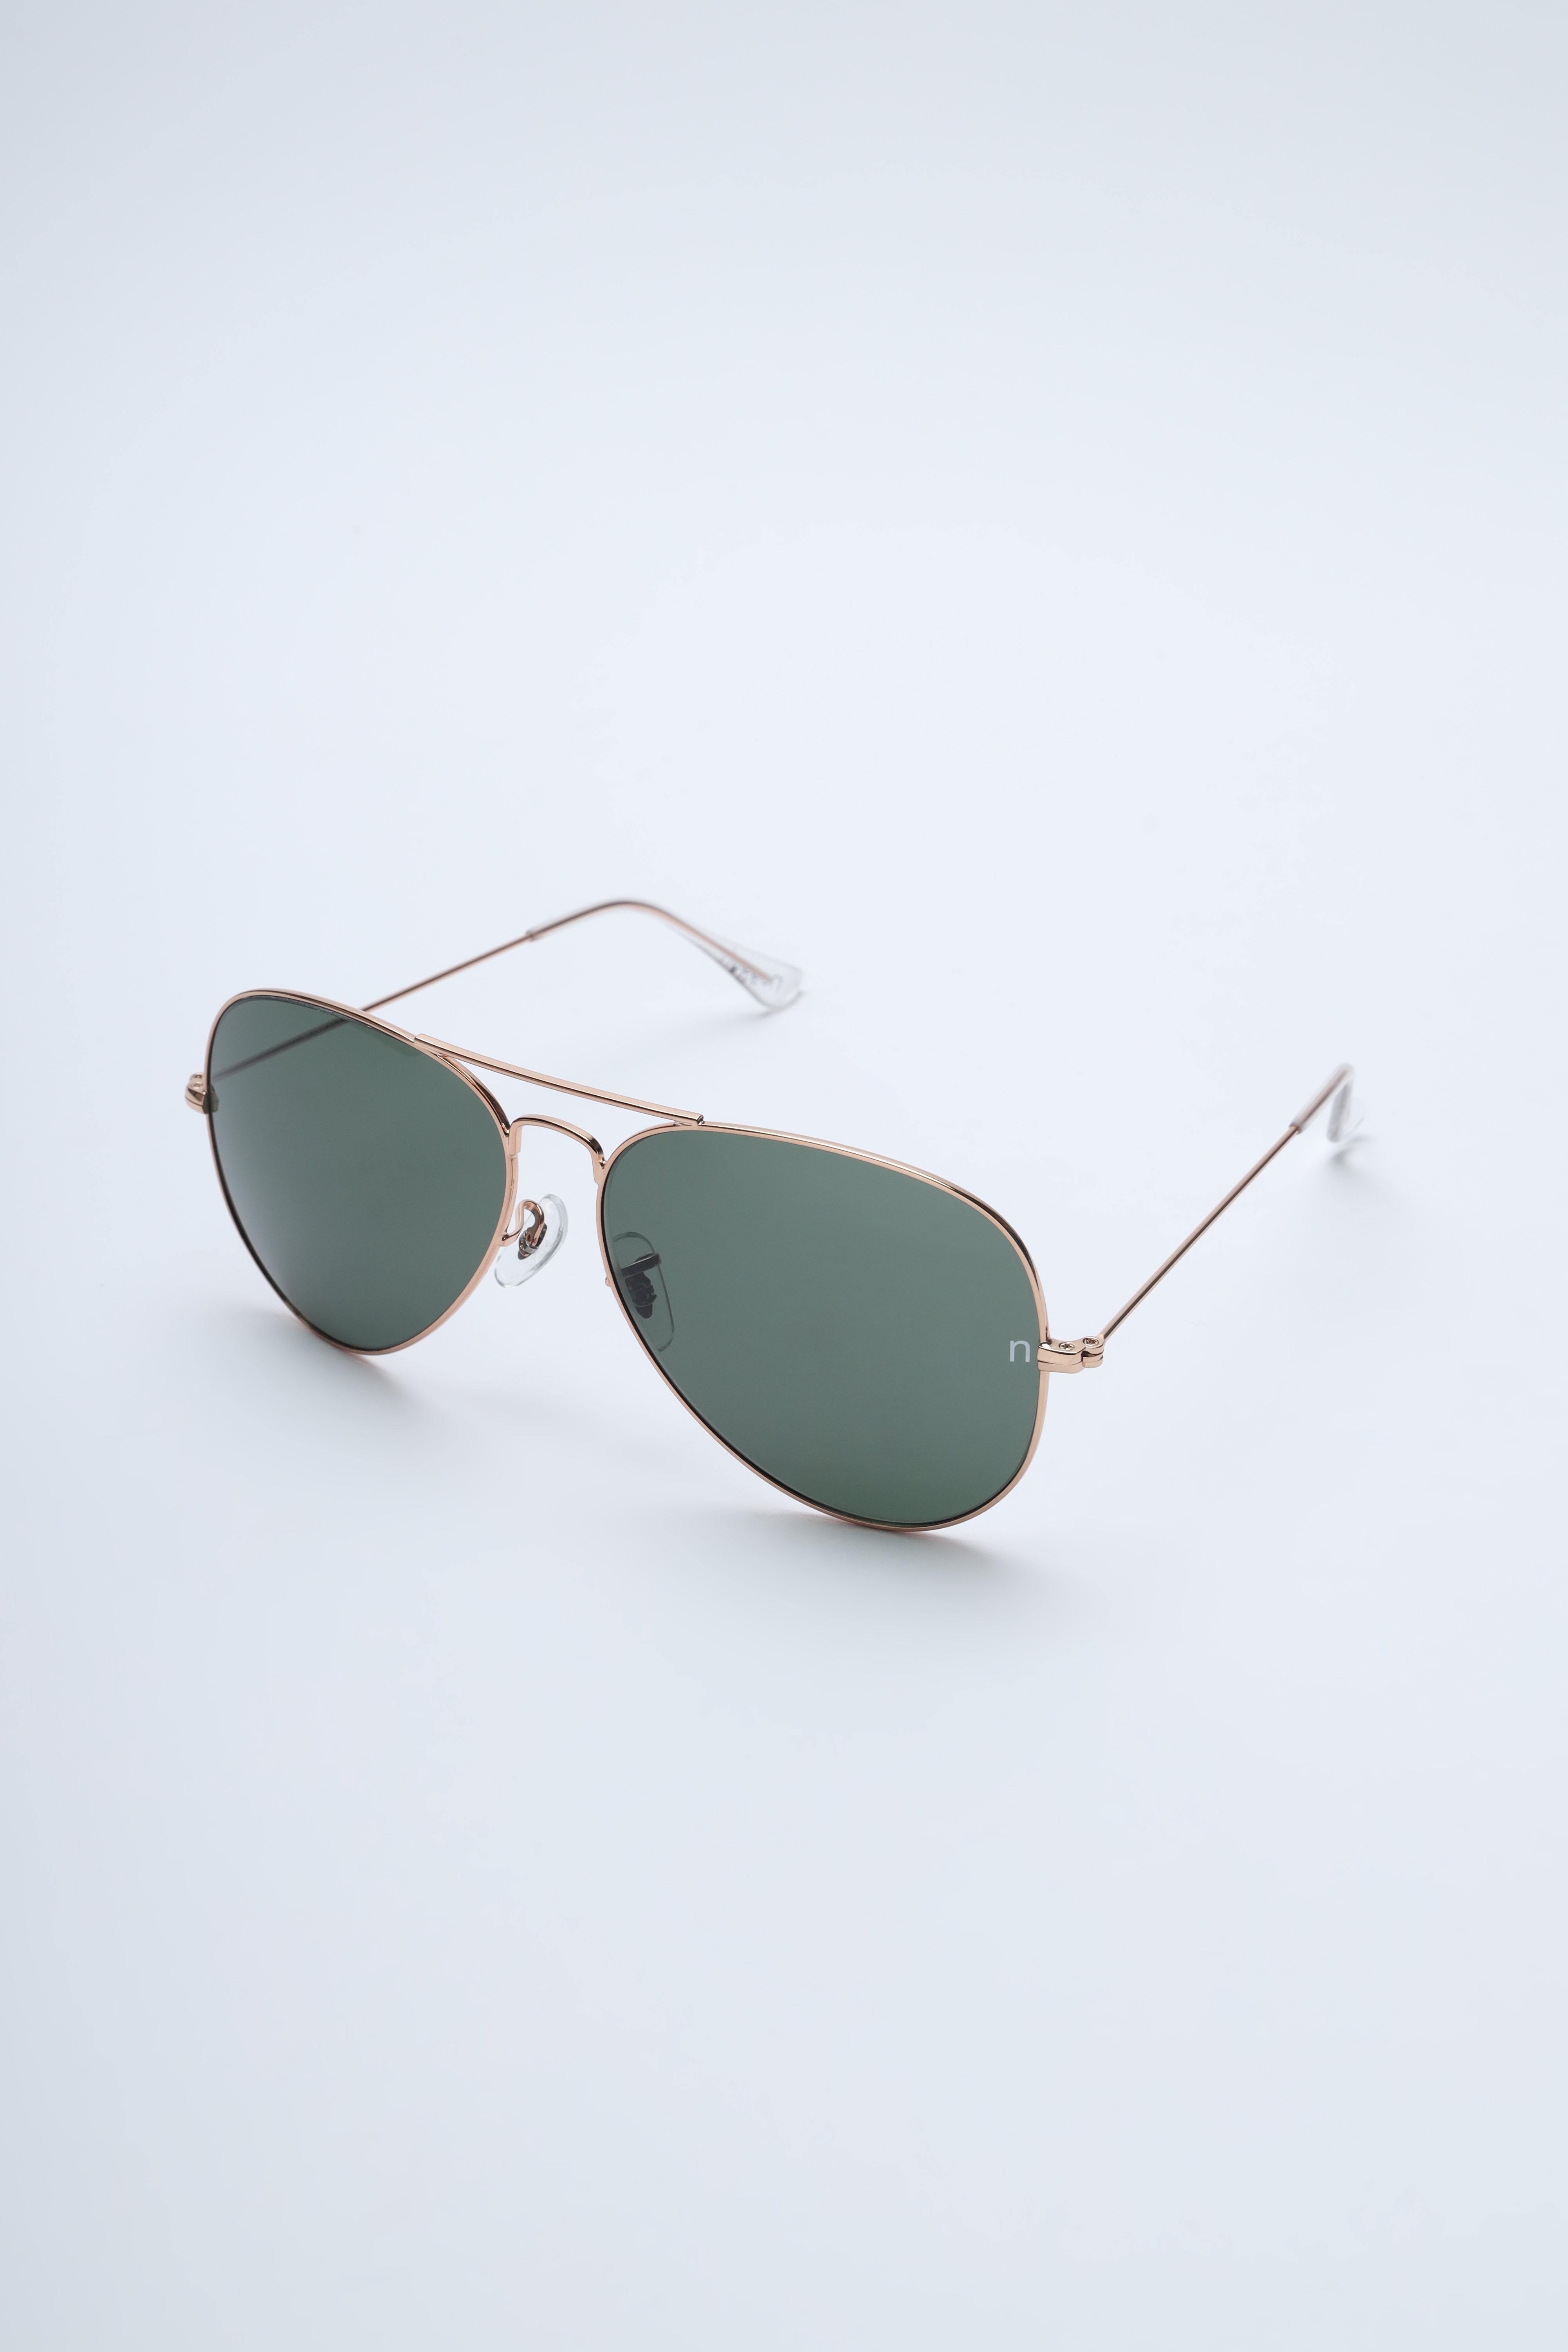 Noggah | Noggah Aviator Stainless Steel Gold Frame with Green Glass UV Protection Lens  Large Size Unisex Sunglasses